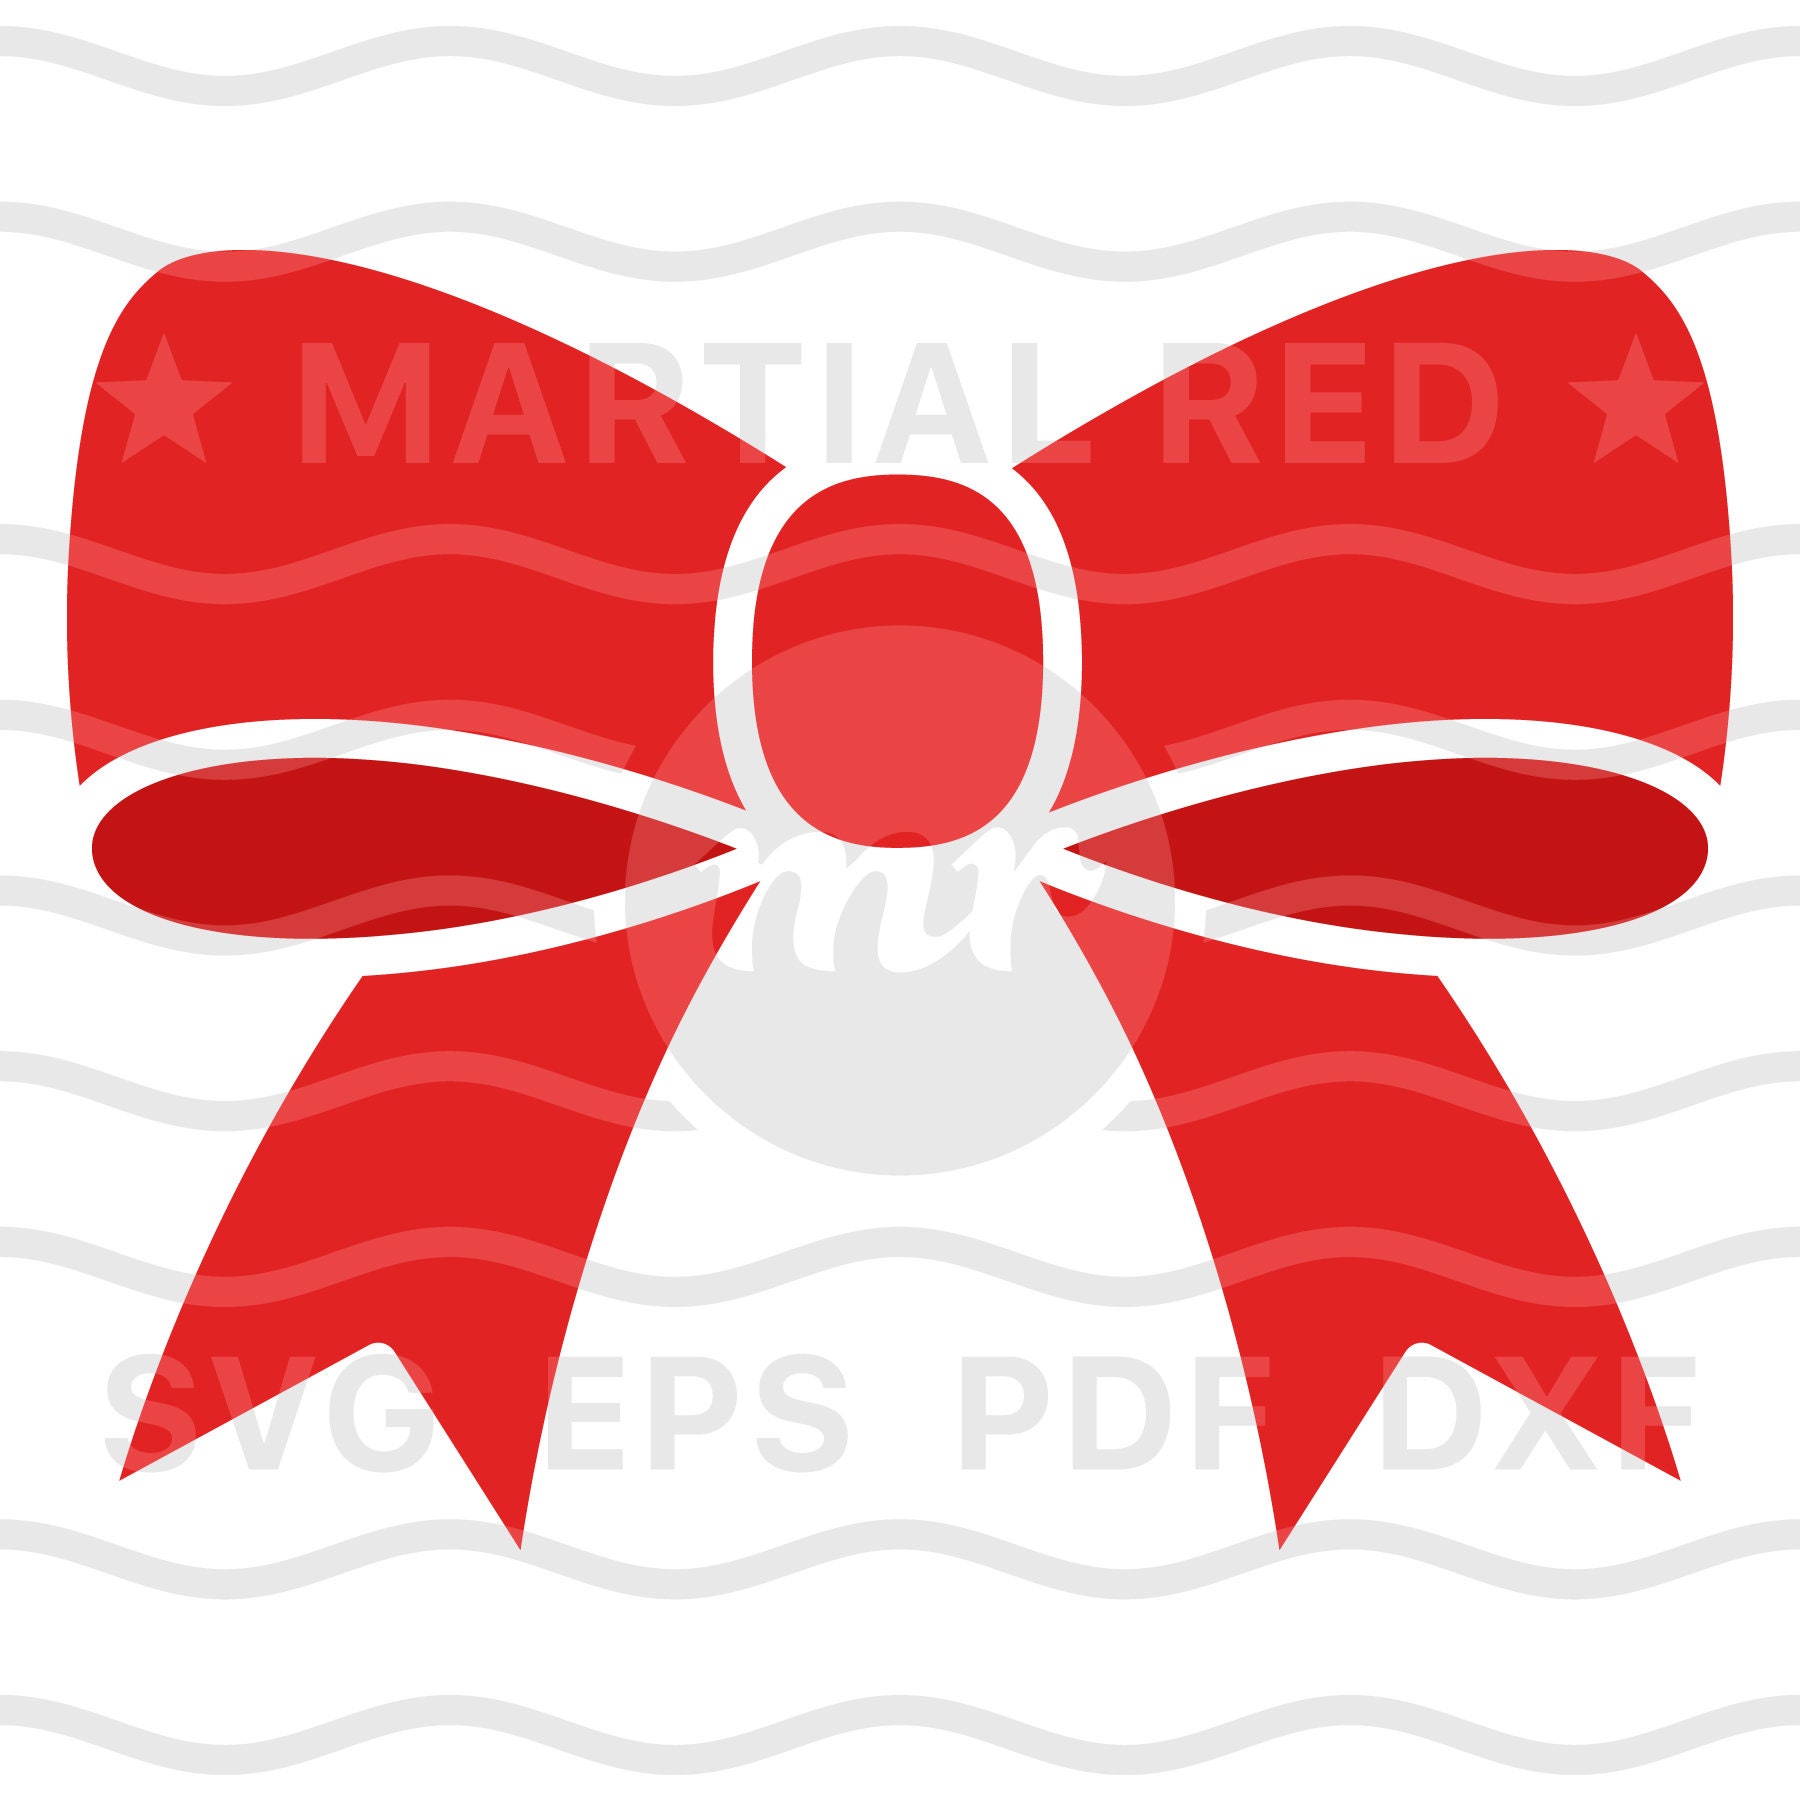 Realistic red bow and ribbon transparent Vector PNG - Similar PNG